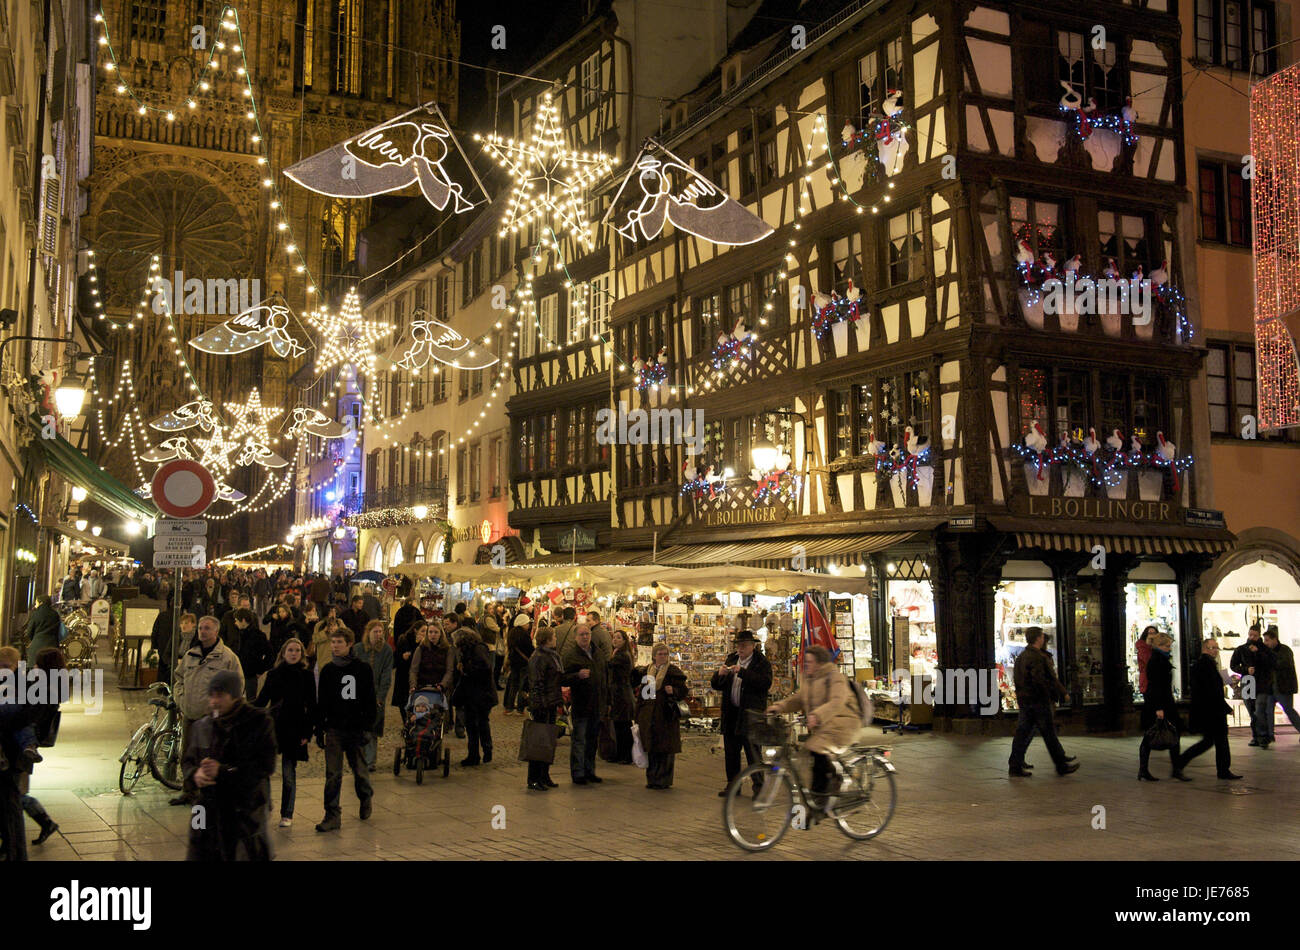 Europe, France, Alsace, Strasbourg, Christmas decoration in the Rue Merciere, Stock Photo